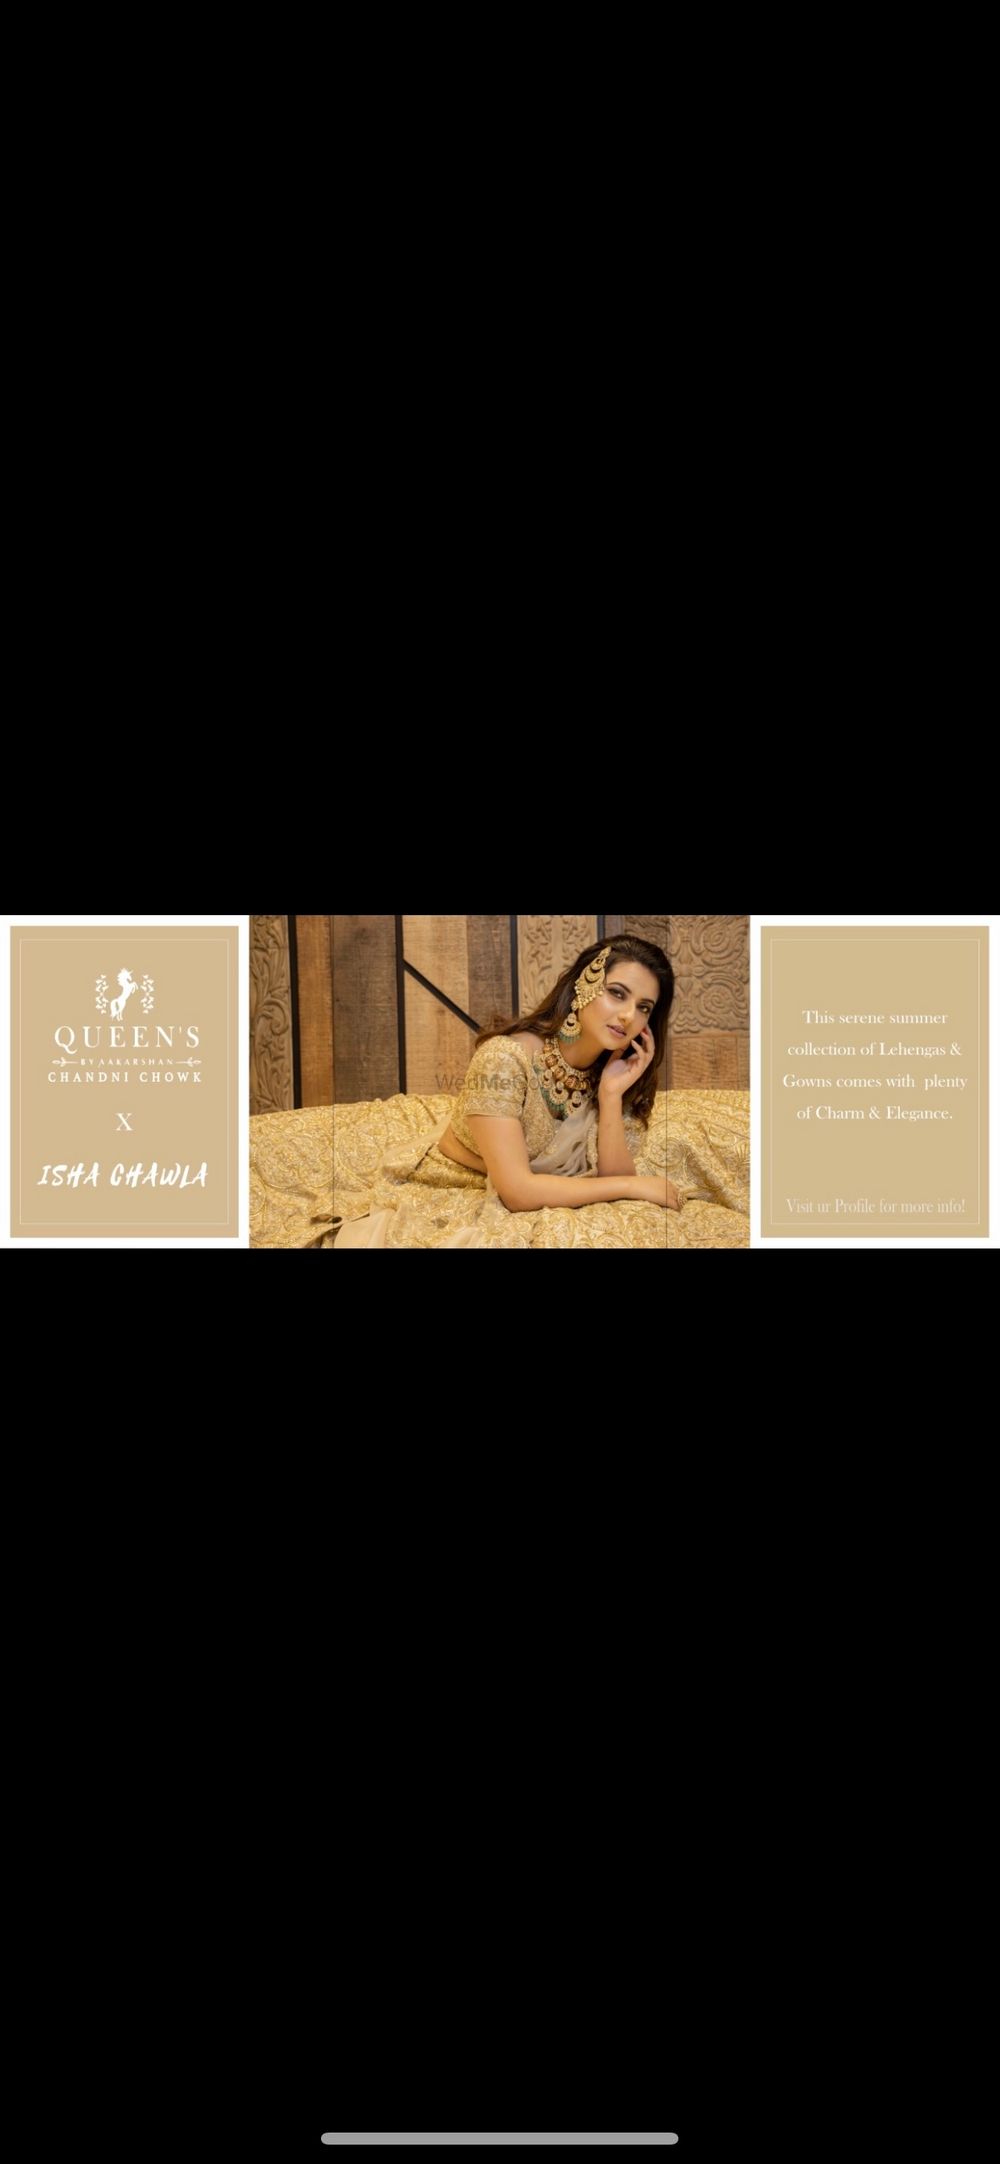 Photo From Isha Chawla & Sapna Chaudhry  - By Queen’s by Aakarshan